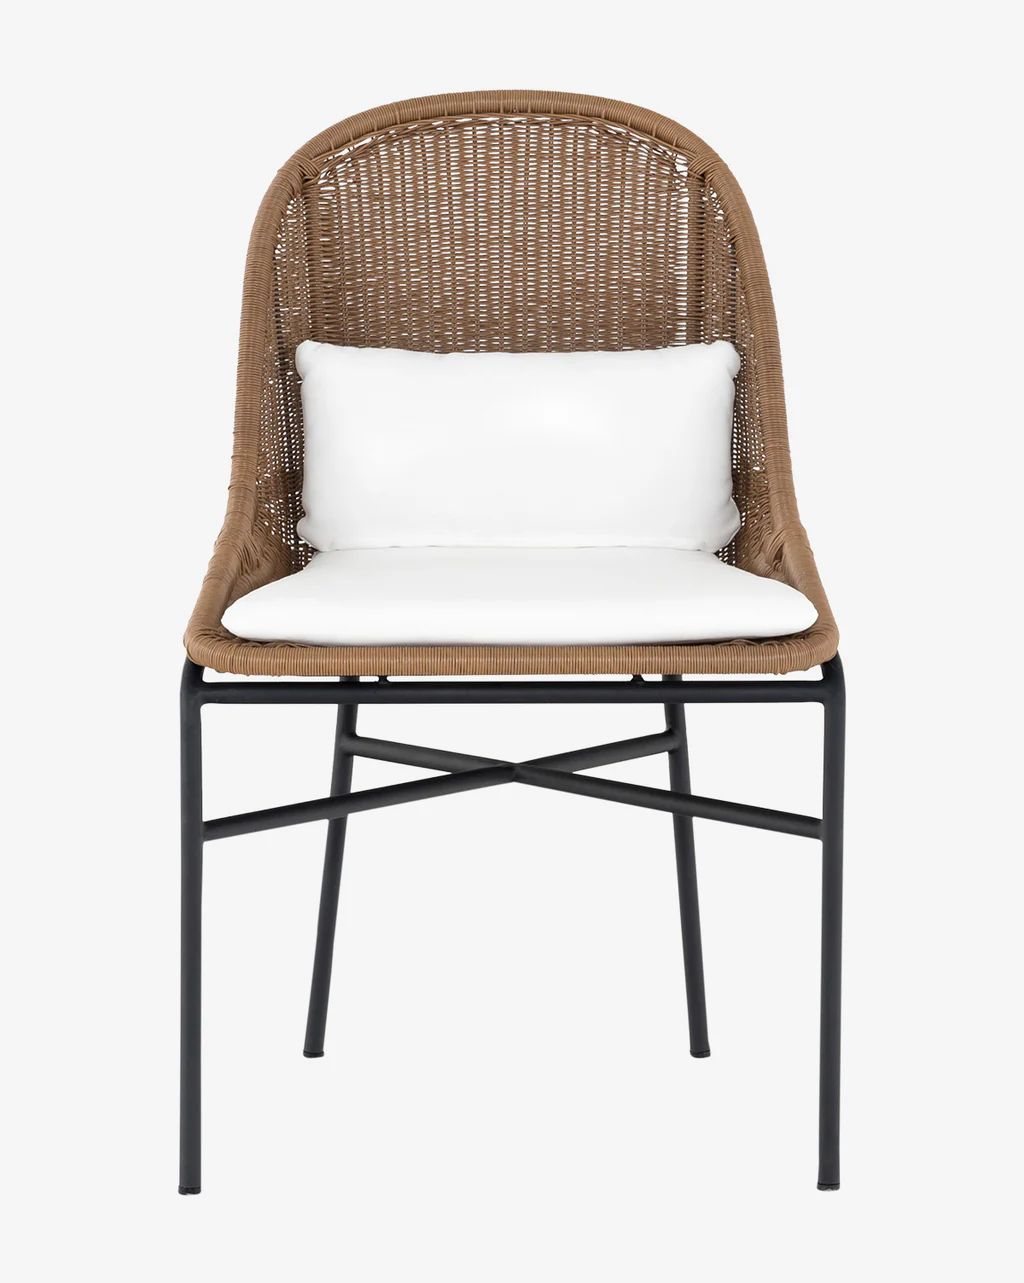 Wendling Outdoor Chair | McGee & Co.